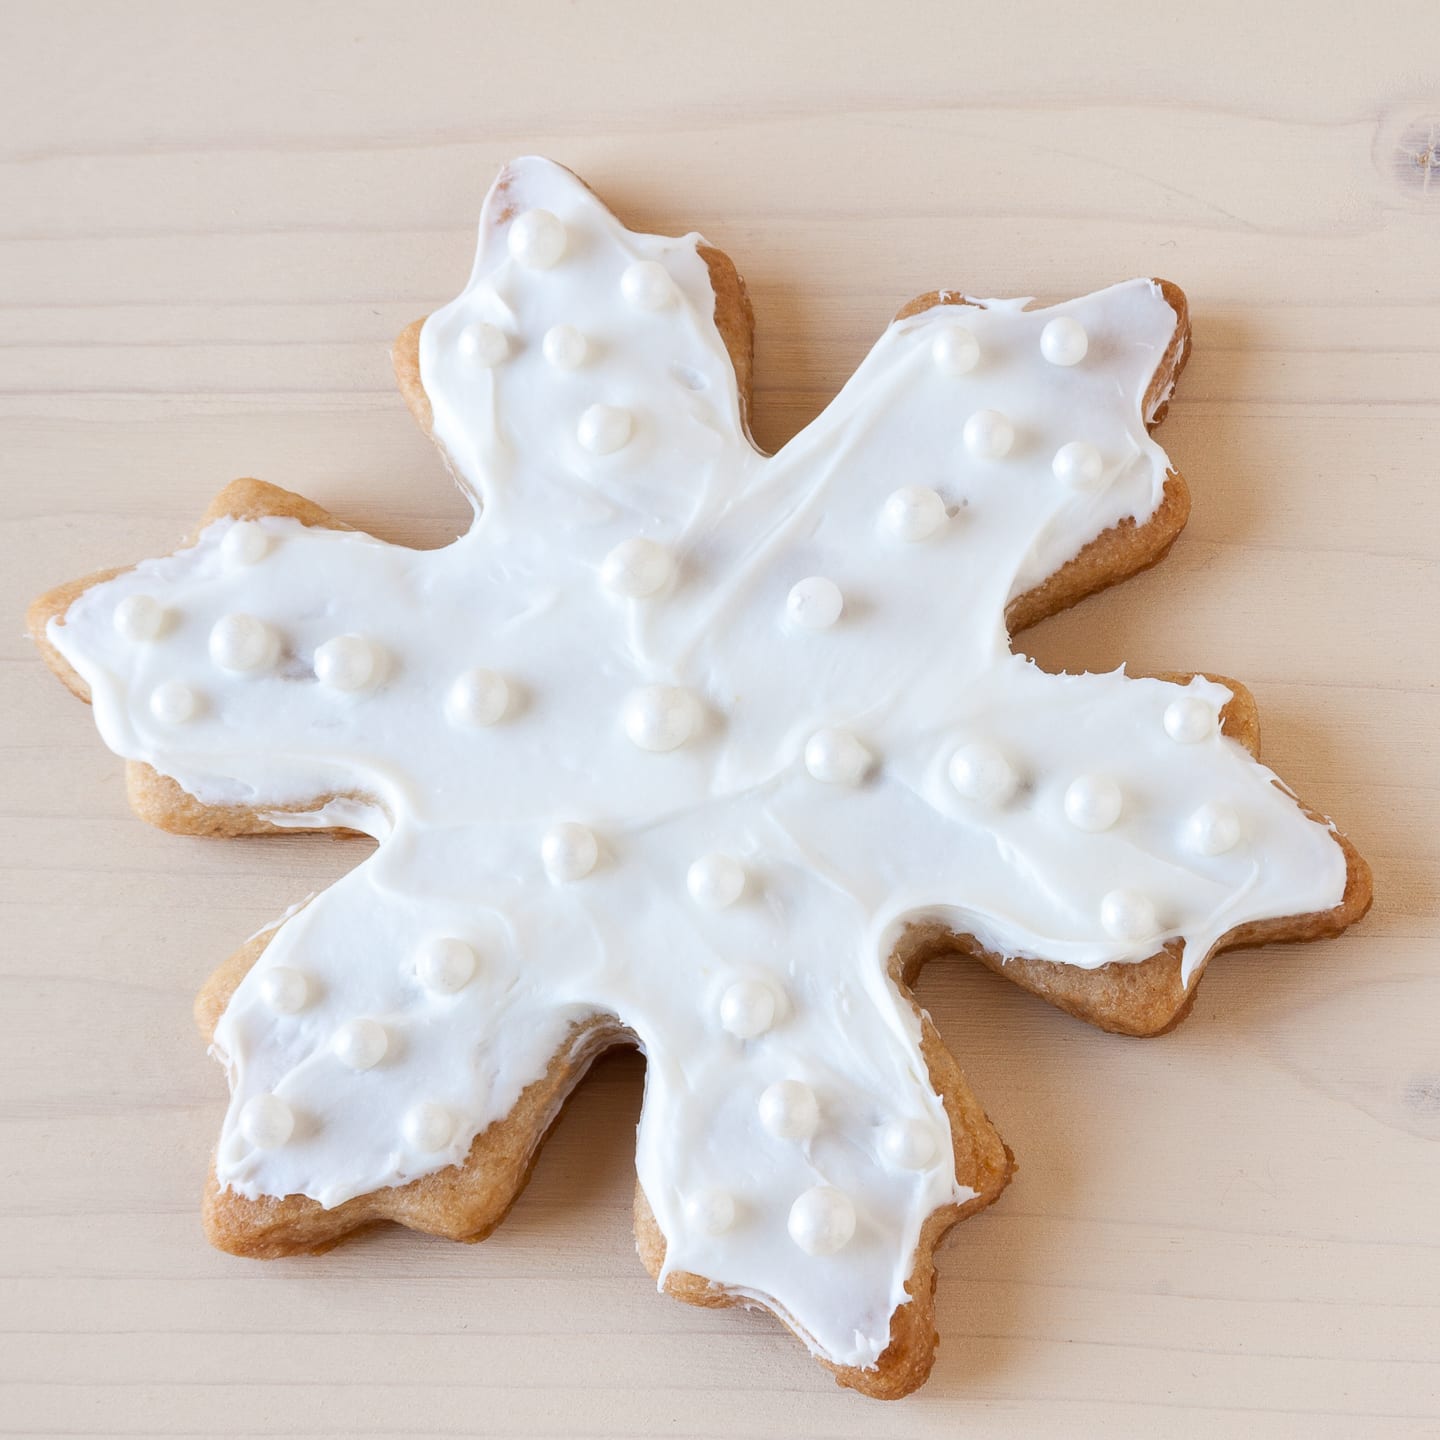 A snowflake cookie decorated with white icing and sugar pearls